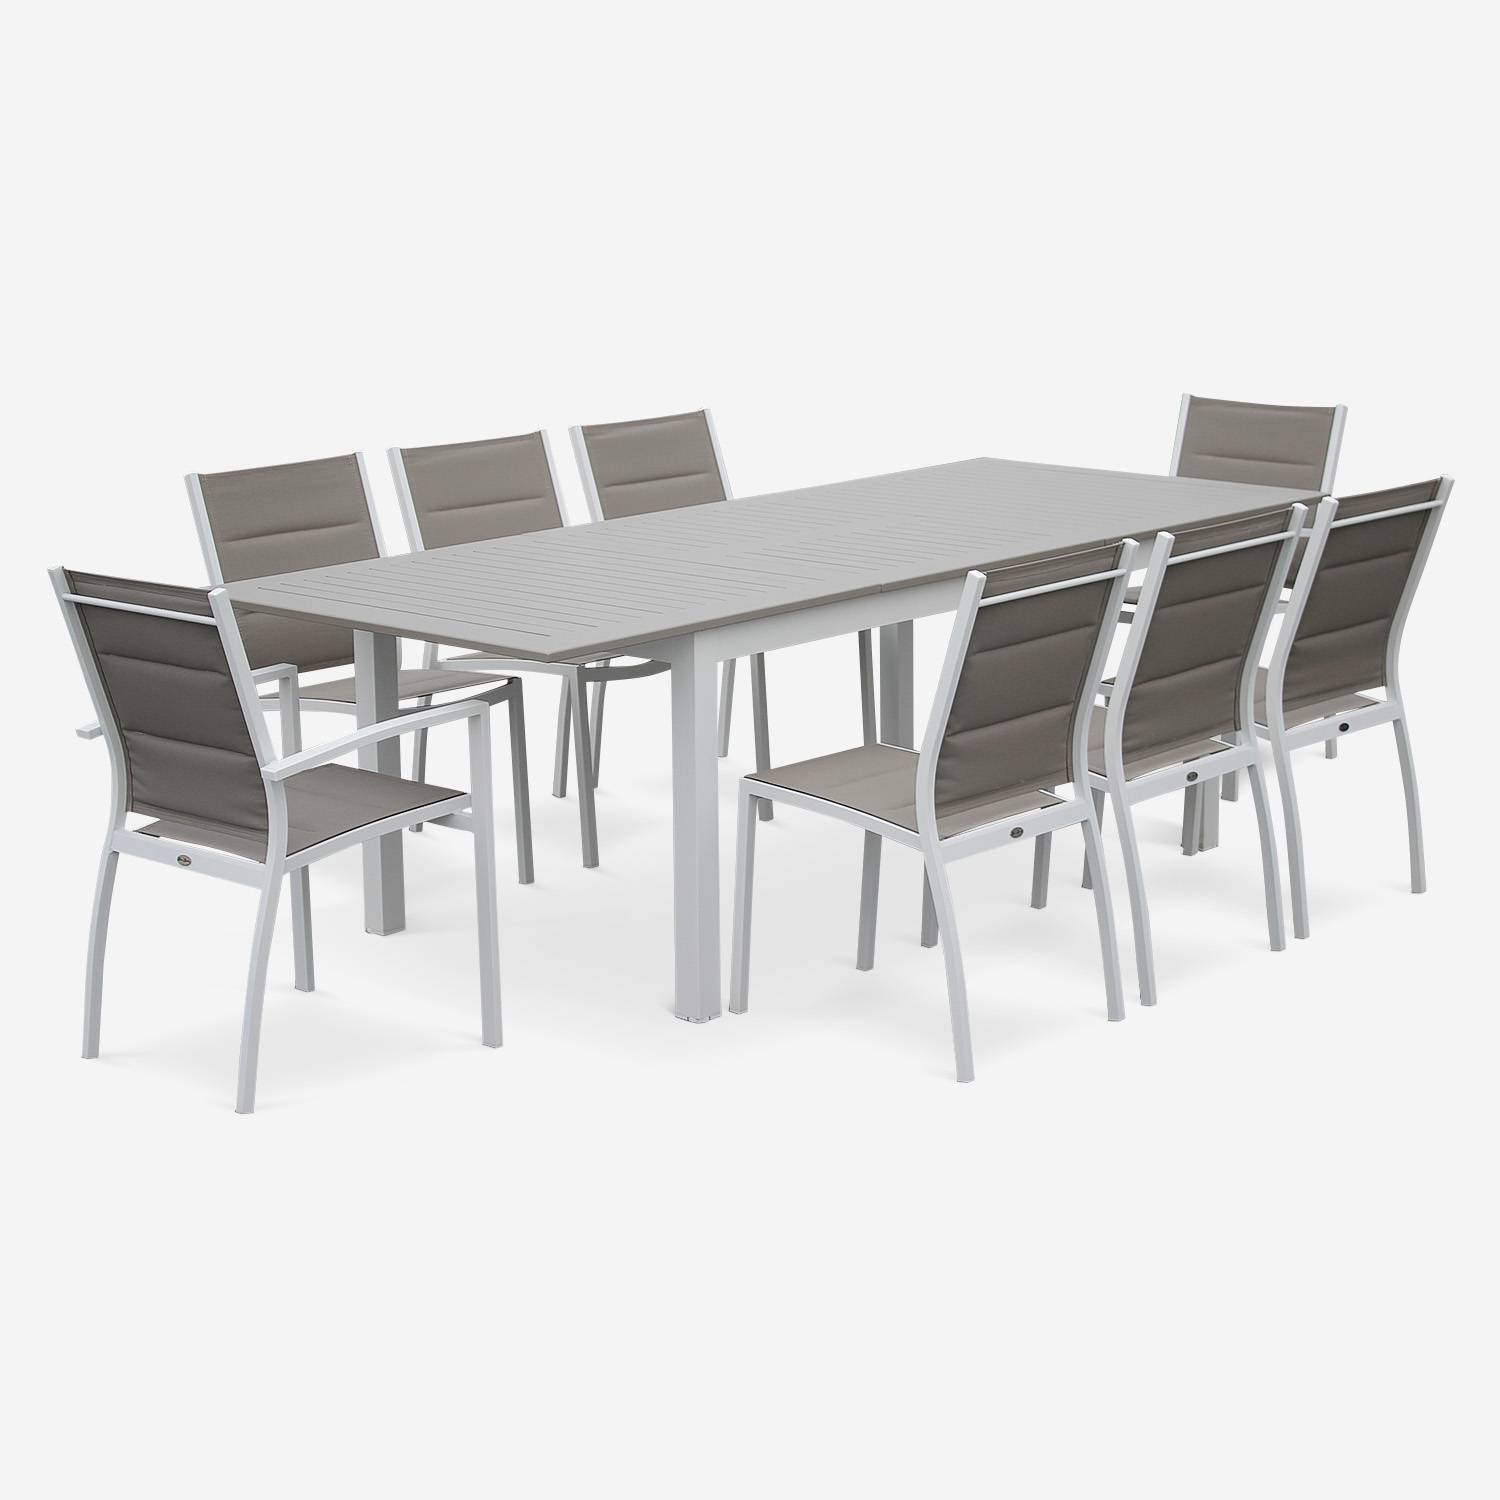 8-seater garden dining set, extendable 175-245cm aluminium table, 6 chairs and 2 armchairs - Chicago 8 - White frame, Beige-Brown textilene Photo2